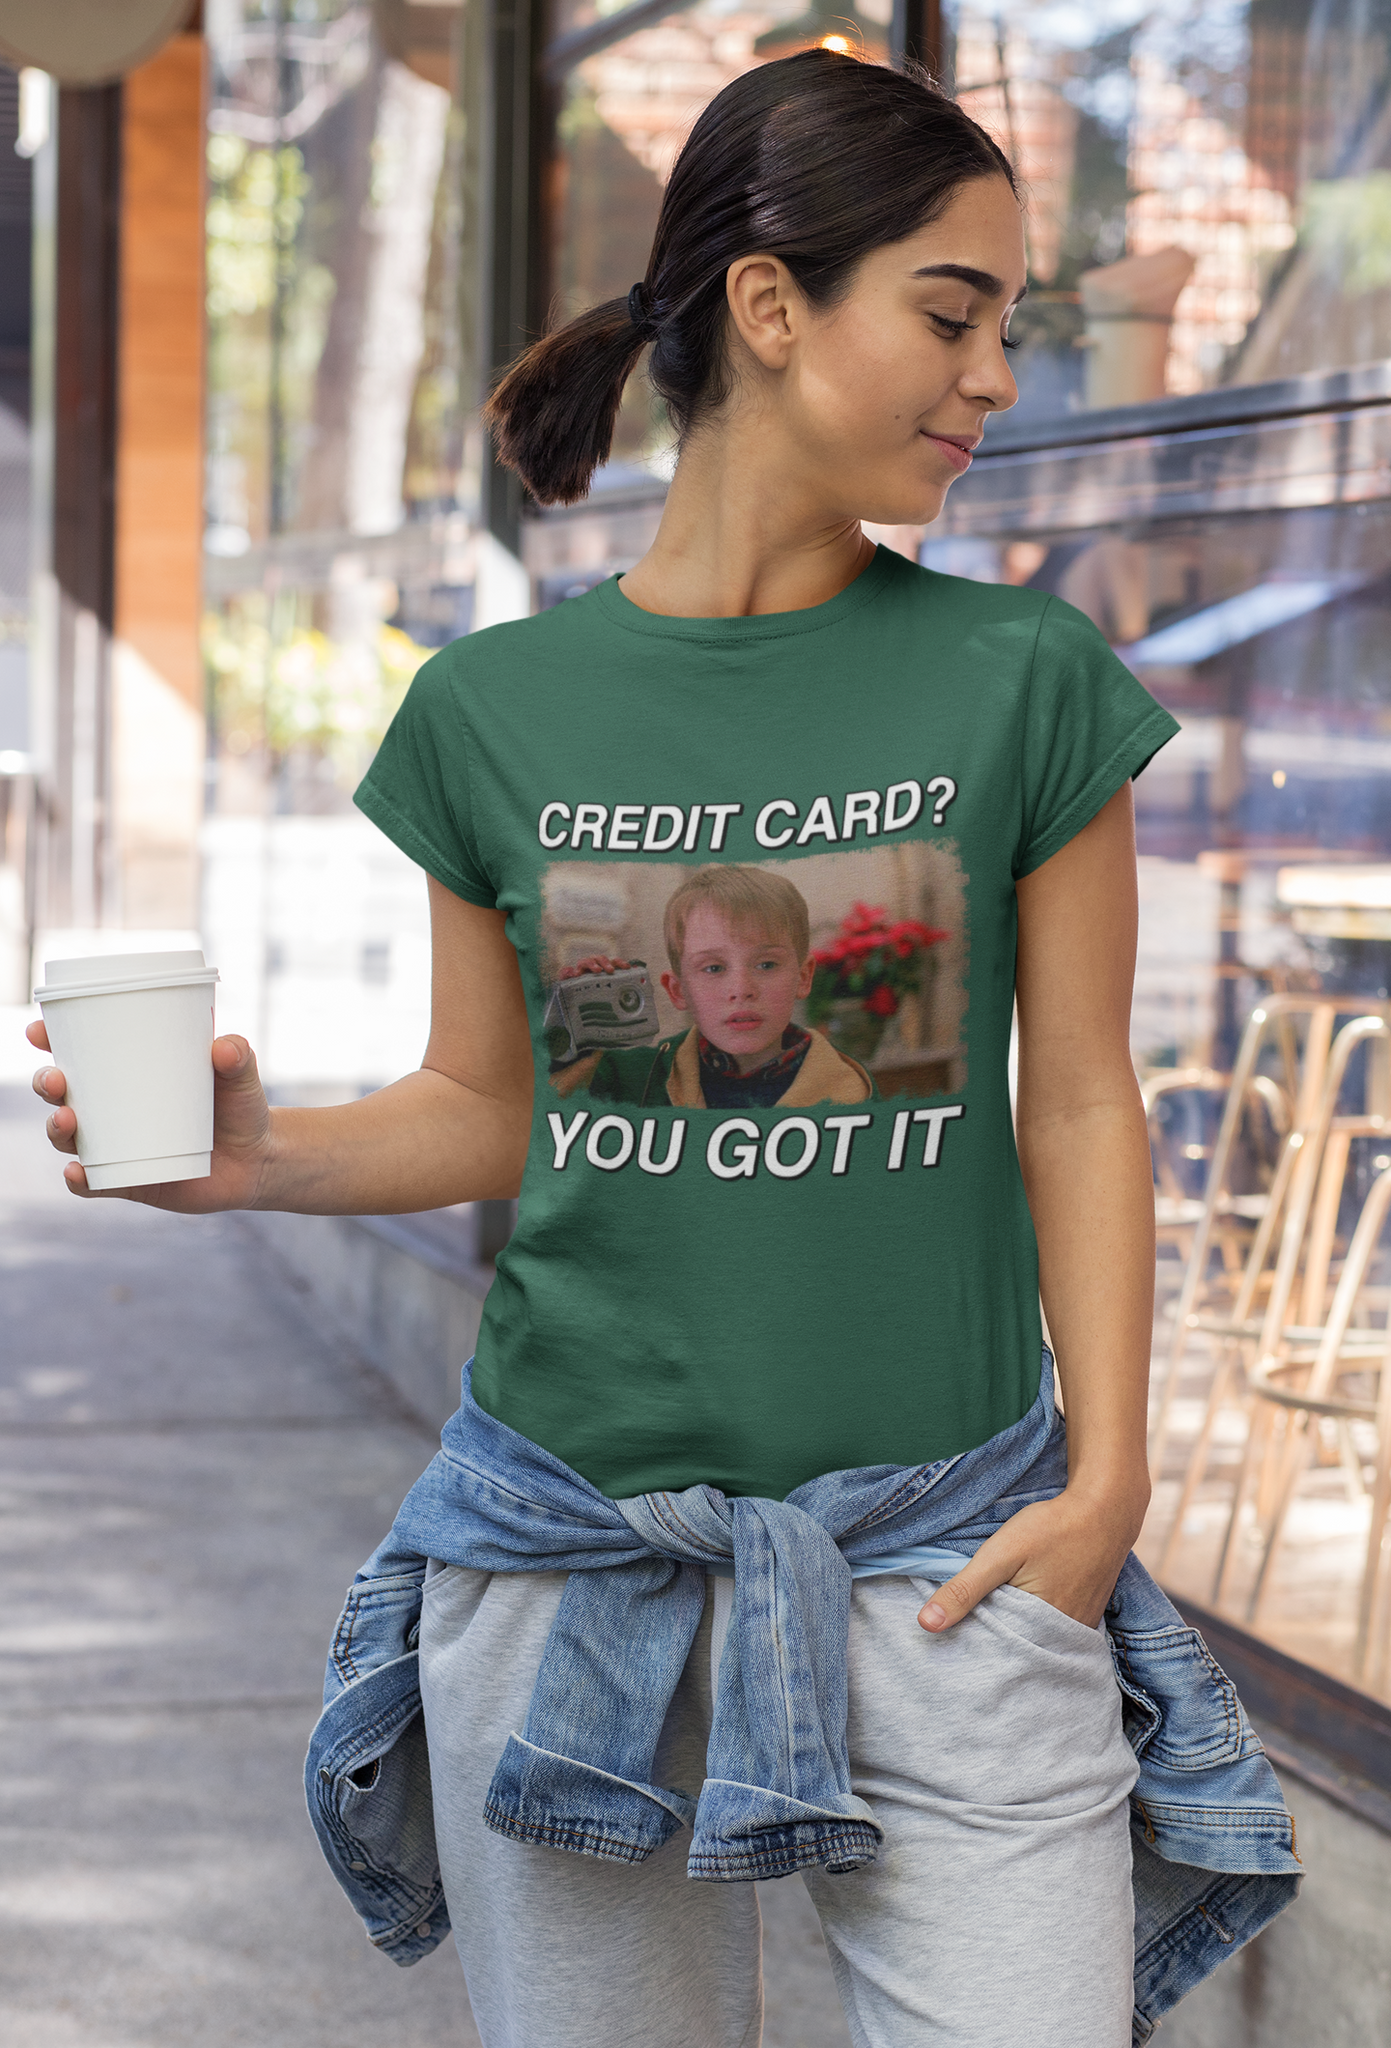 Home Alone T Shirt, Kevin McCallister Tshirt, Credit Card You Got It Shirt, Christmas Gifts